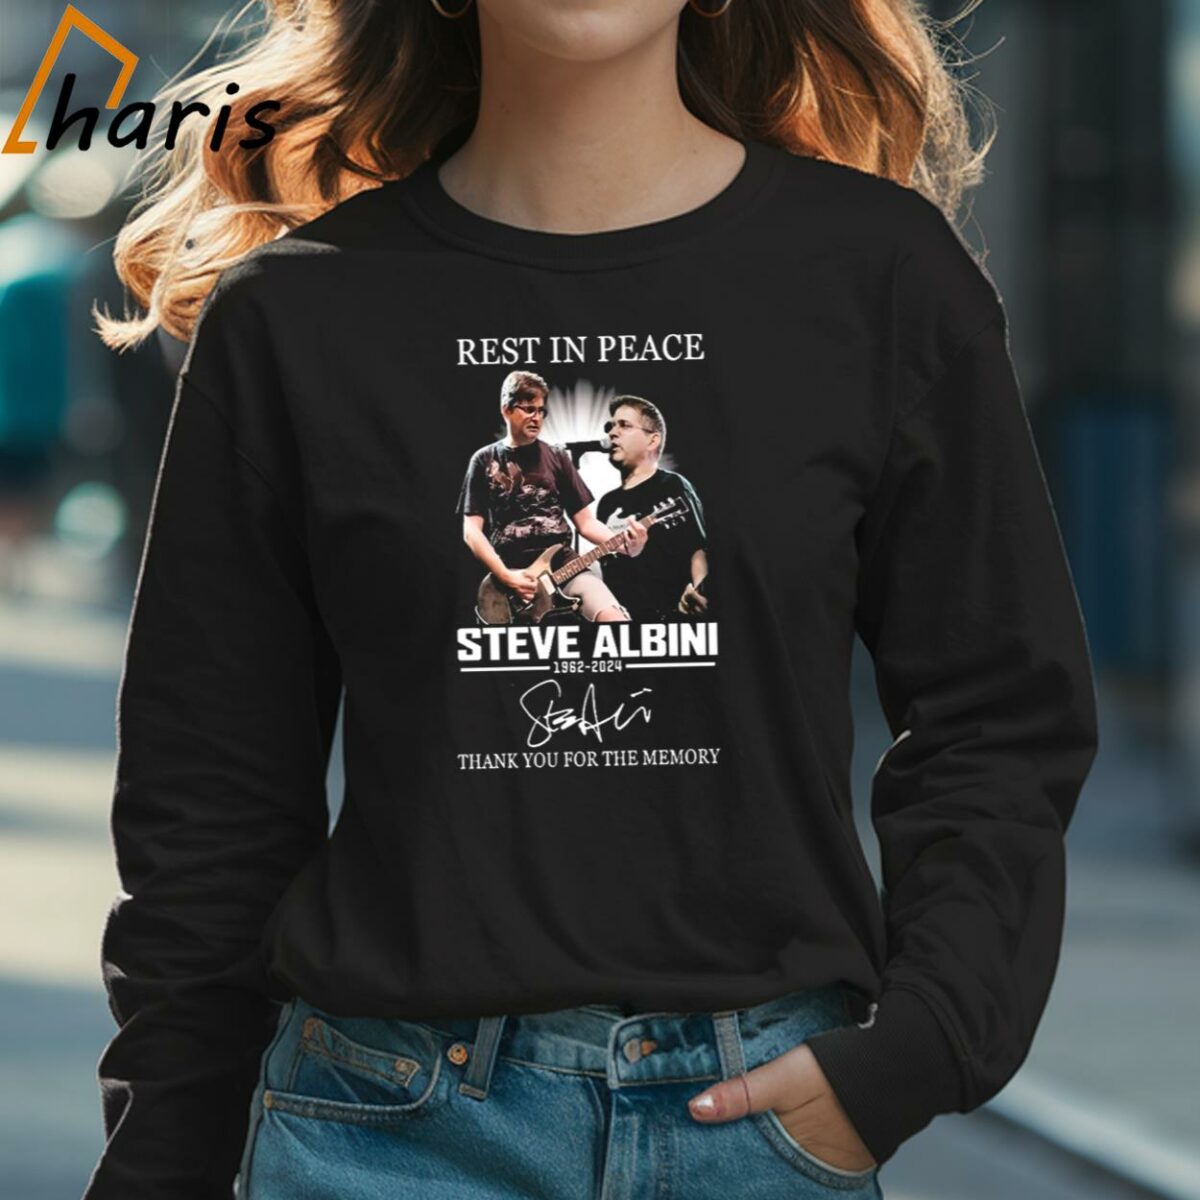 Rest In Peace Steve Albini Thank You For The Memory Signature T shirt 3 Long sleeve shirt